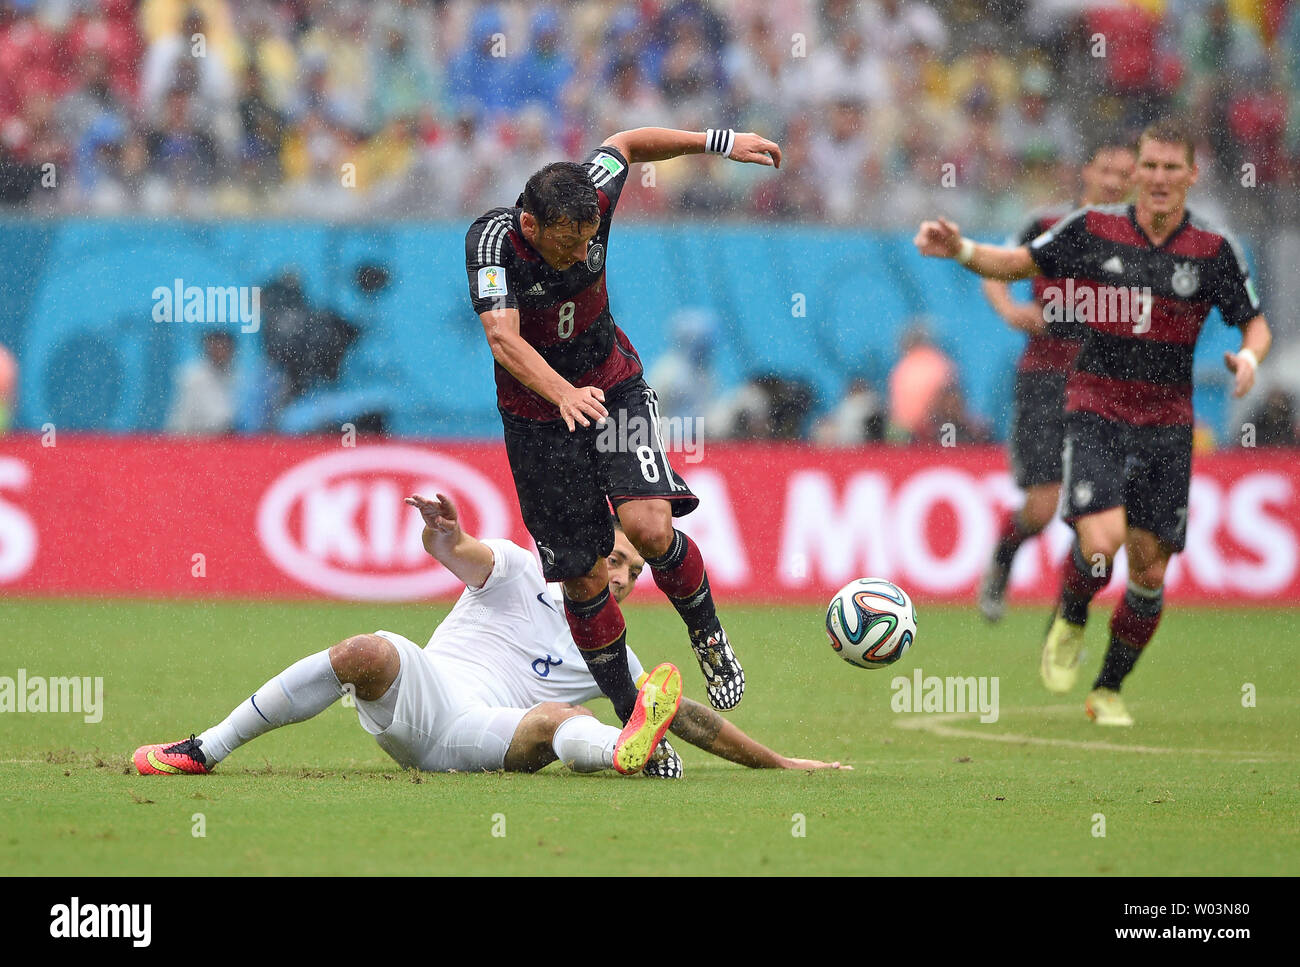 Clint Dempsey (L) of USA challenges Mesut Ozil of Germany during the 2014 FIFA World Cup Group G match at the Arena Pernambuco in Recife, Brazil on June 26, 2014. UPI/Chris Brunskill Stock Photo